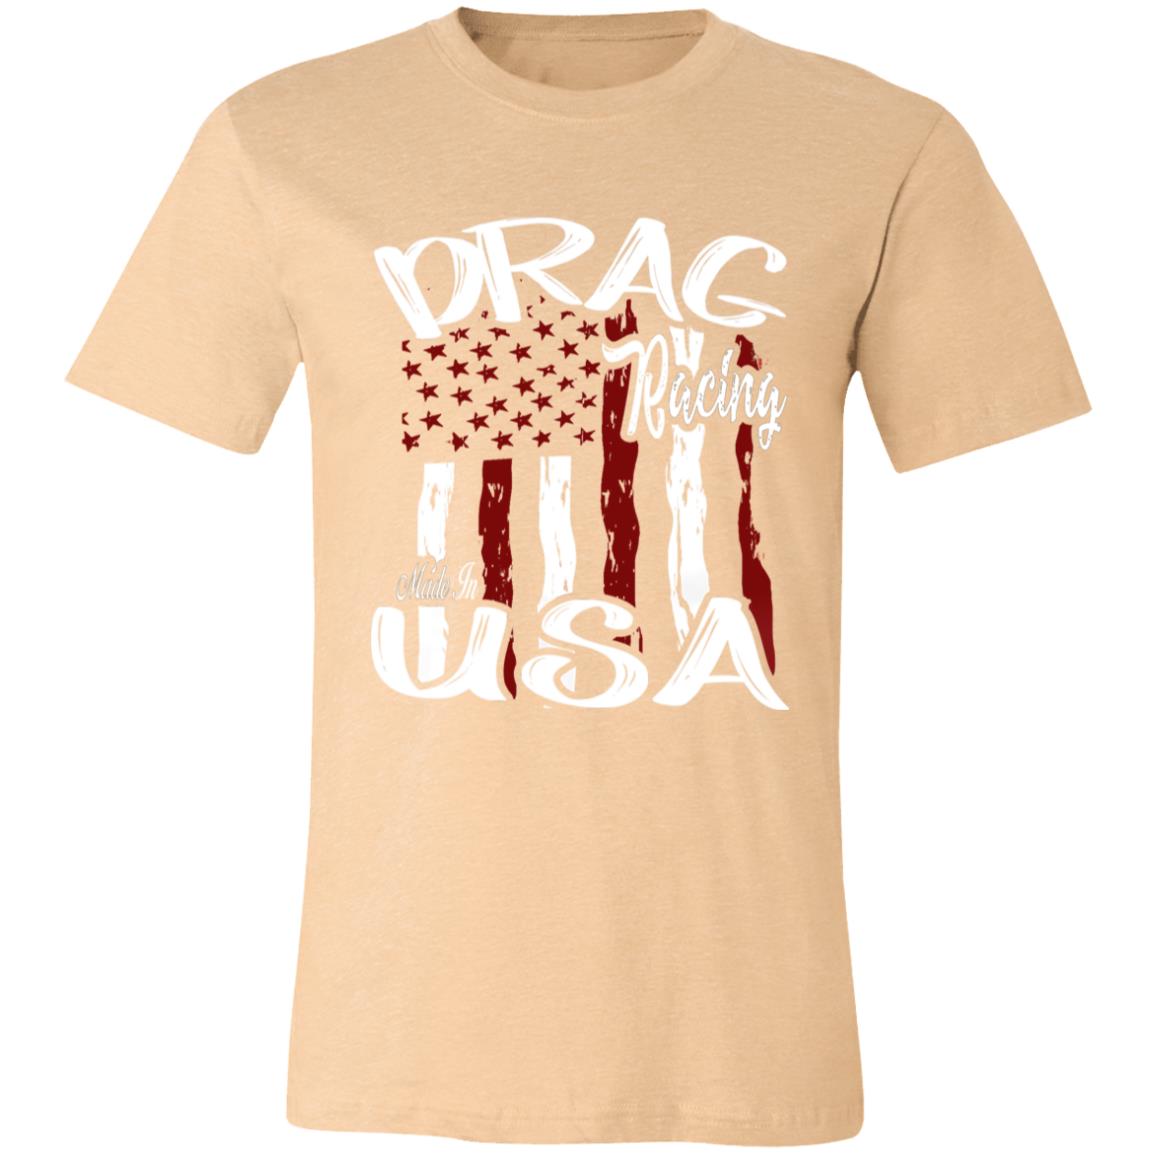 Drag Racing Made In USA Unisex Jersey Short-Sleeve T-Shirt